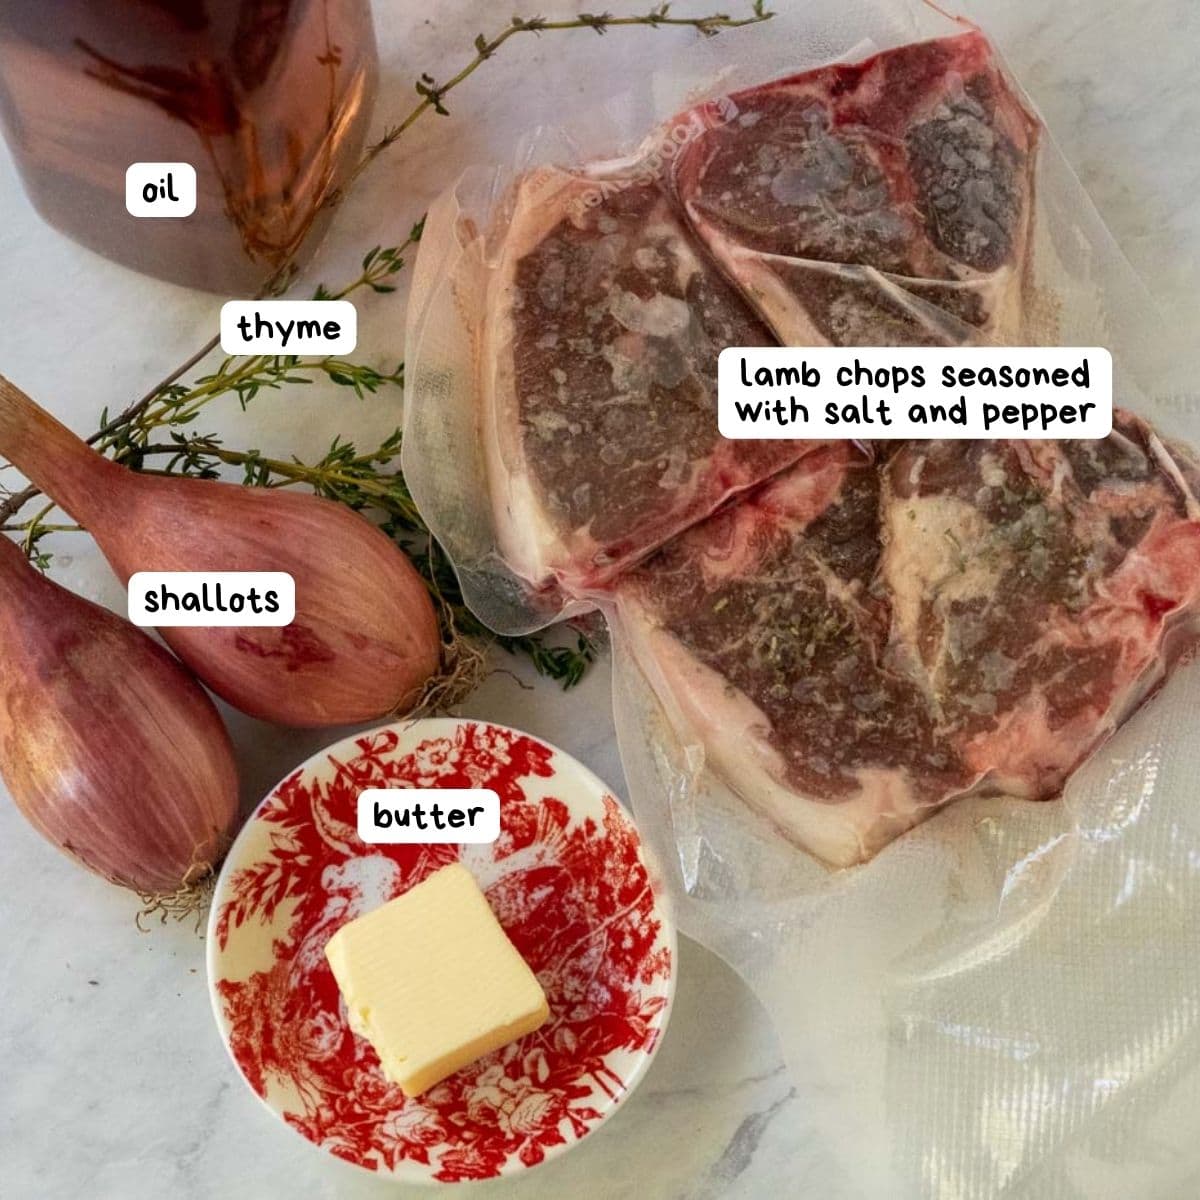 Ingredient photo with labels for sous vide lamb chops.